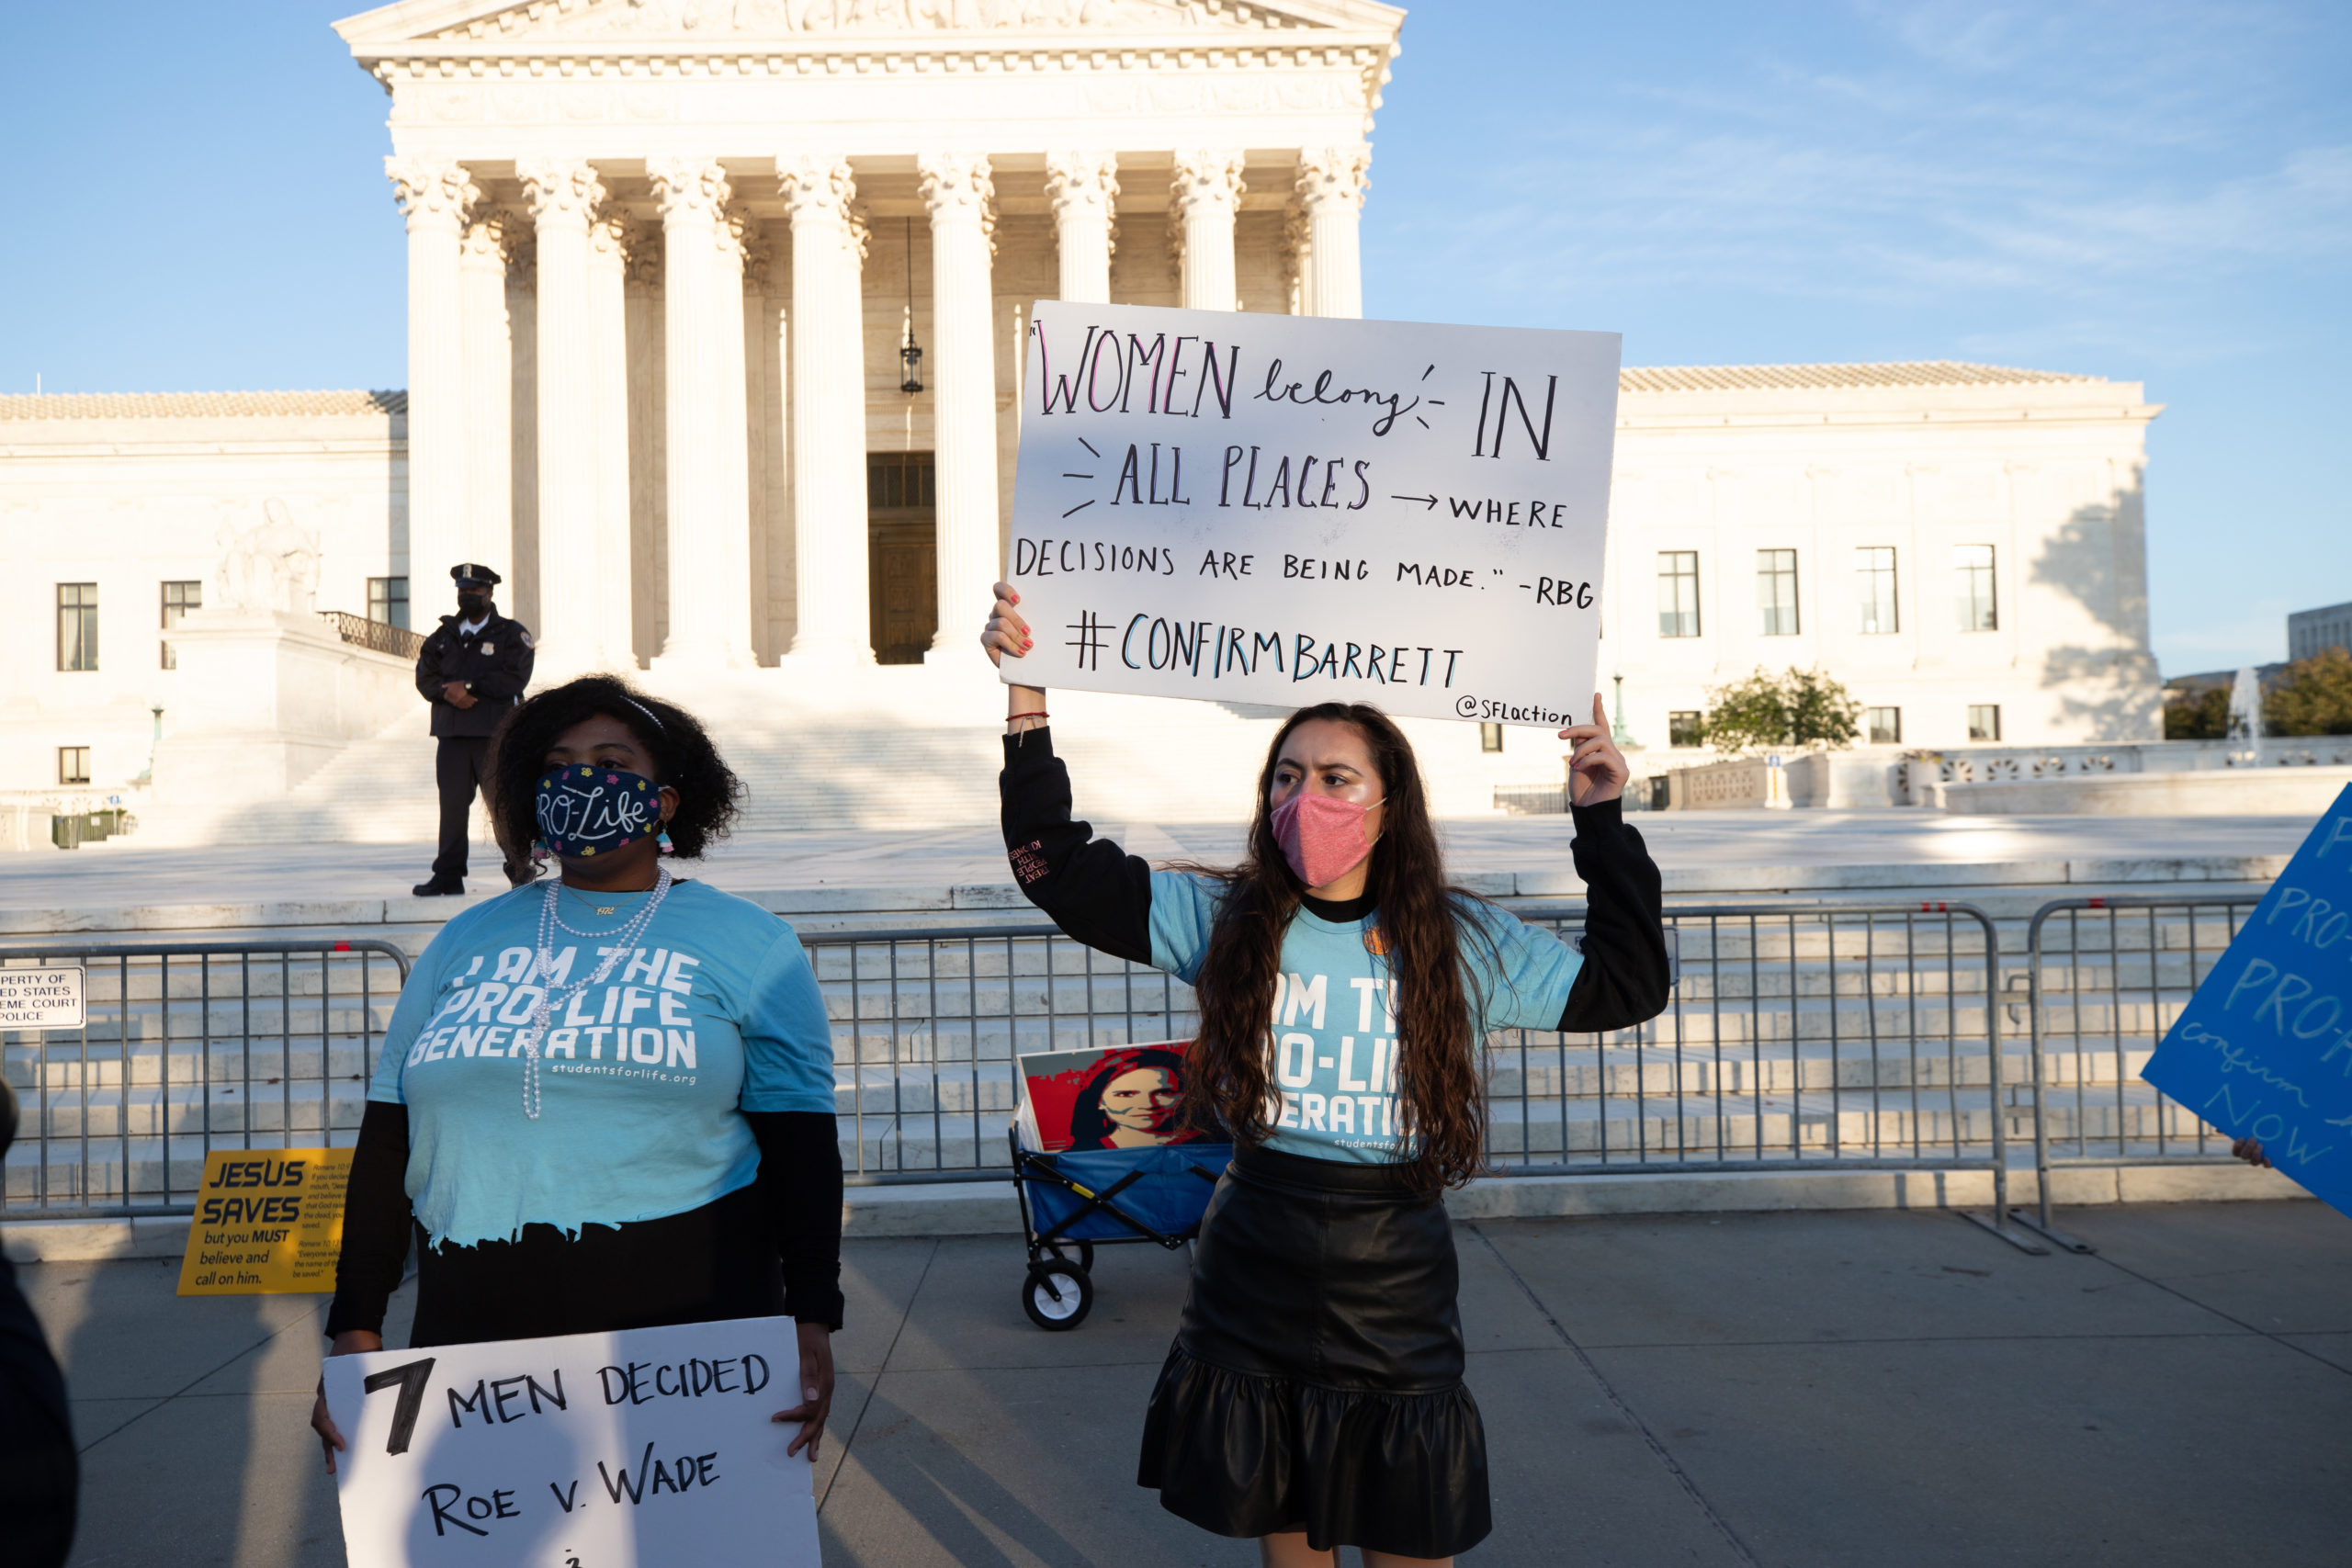 Students for Life members express their support for Amy Coney Barrett ahead of her Supreme Court nomination in Washington, D.C. on October 26, 2020. (Kaylee Greenlee - Daily Caller News Foundation)